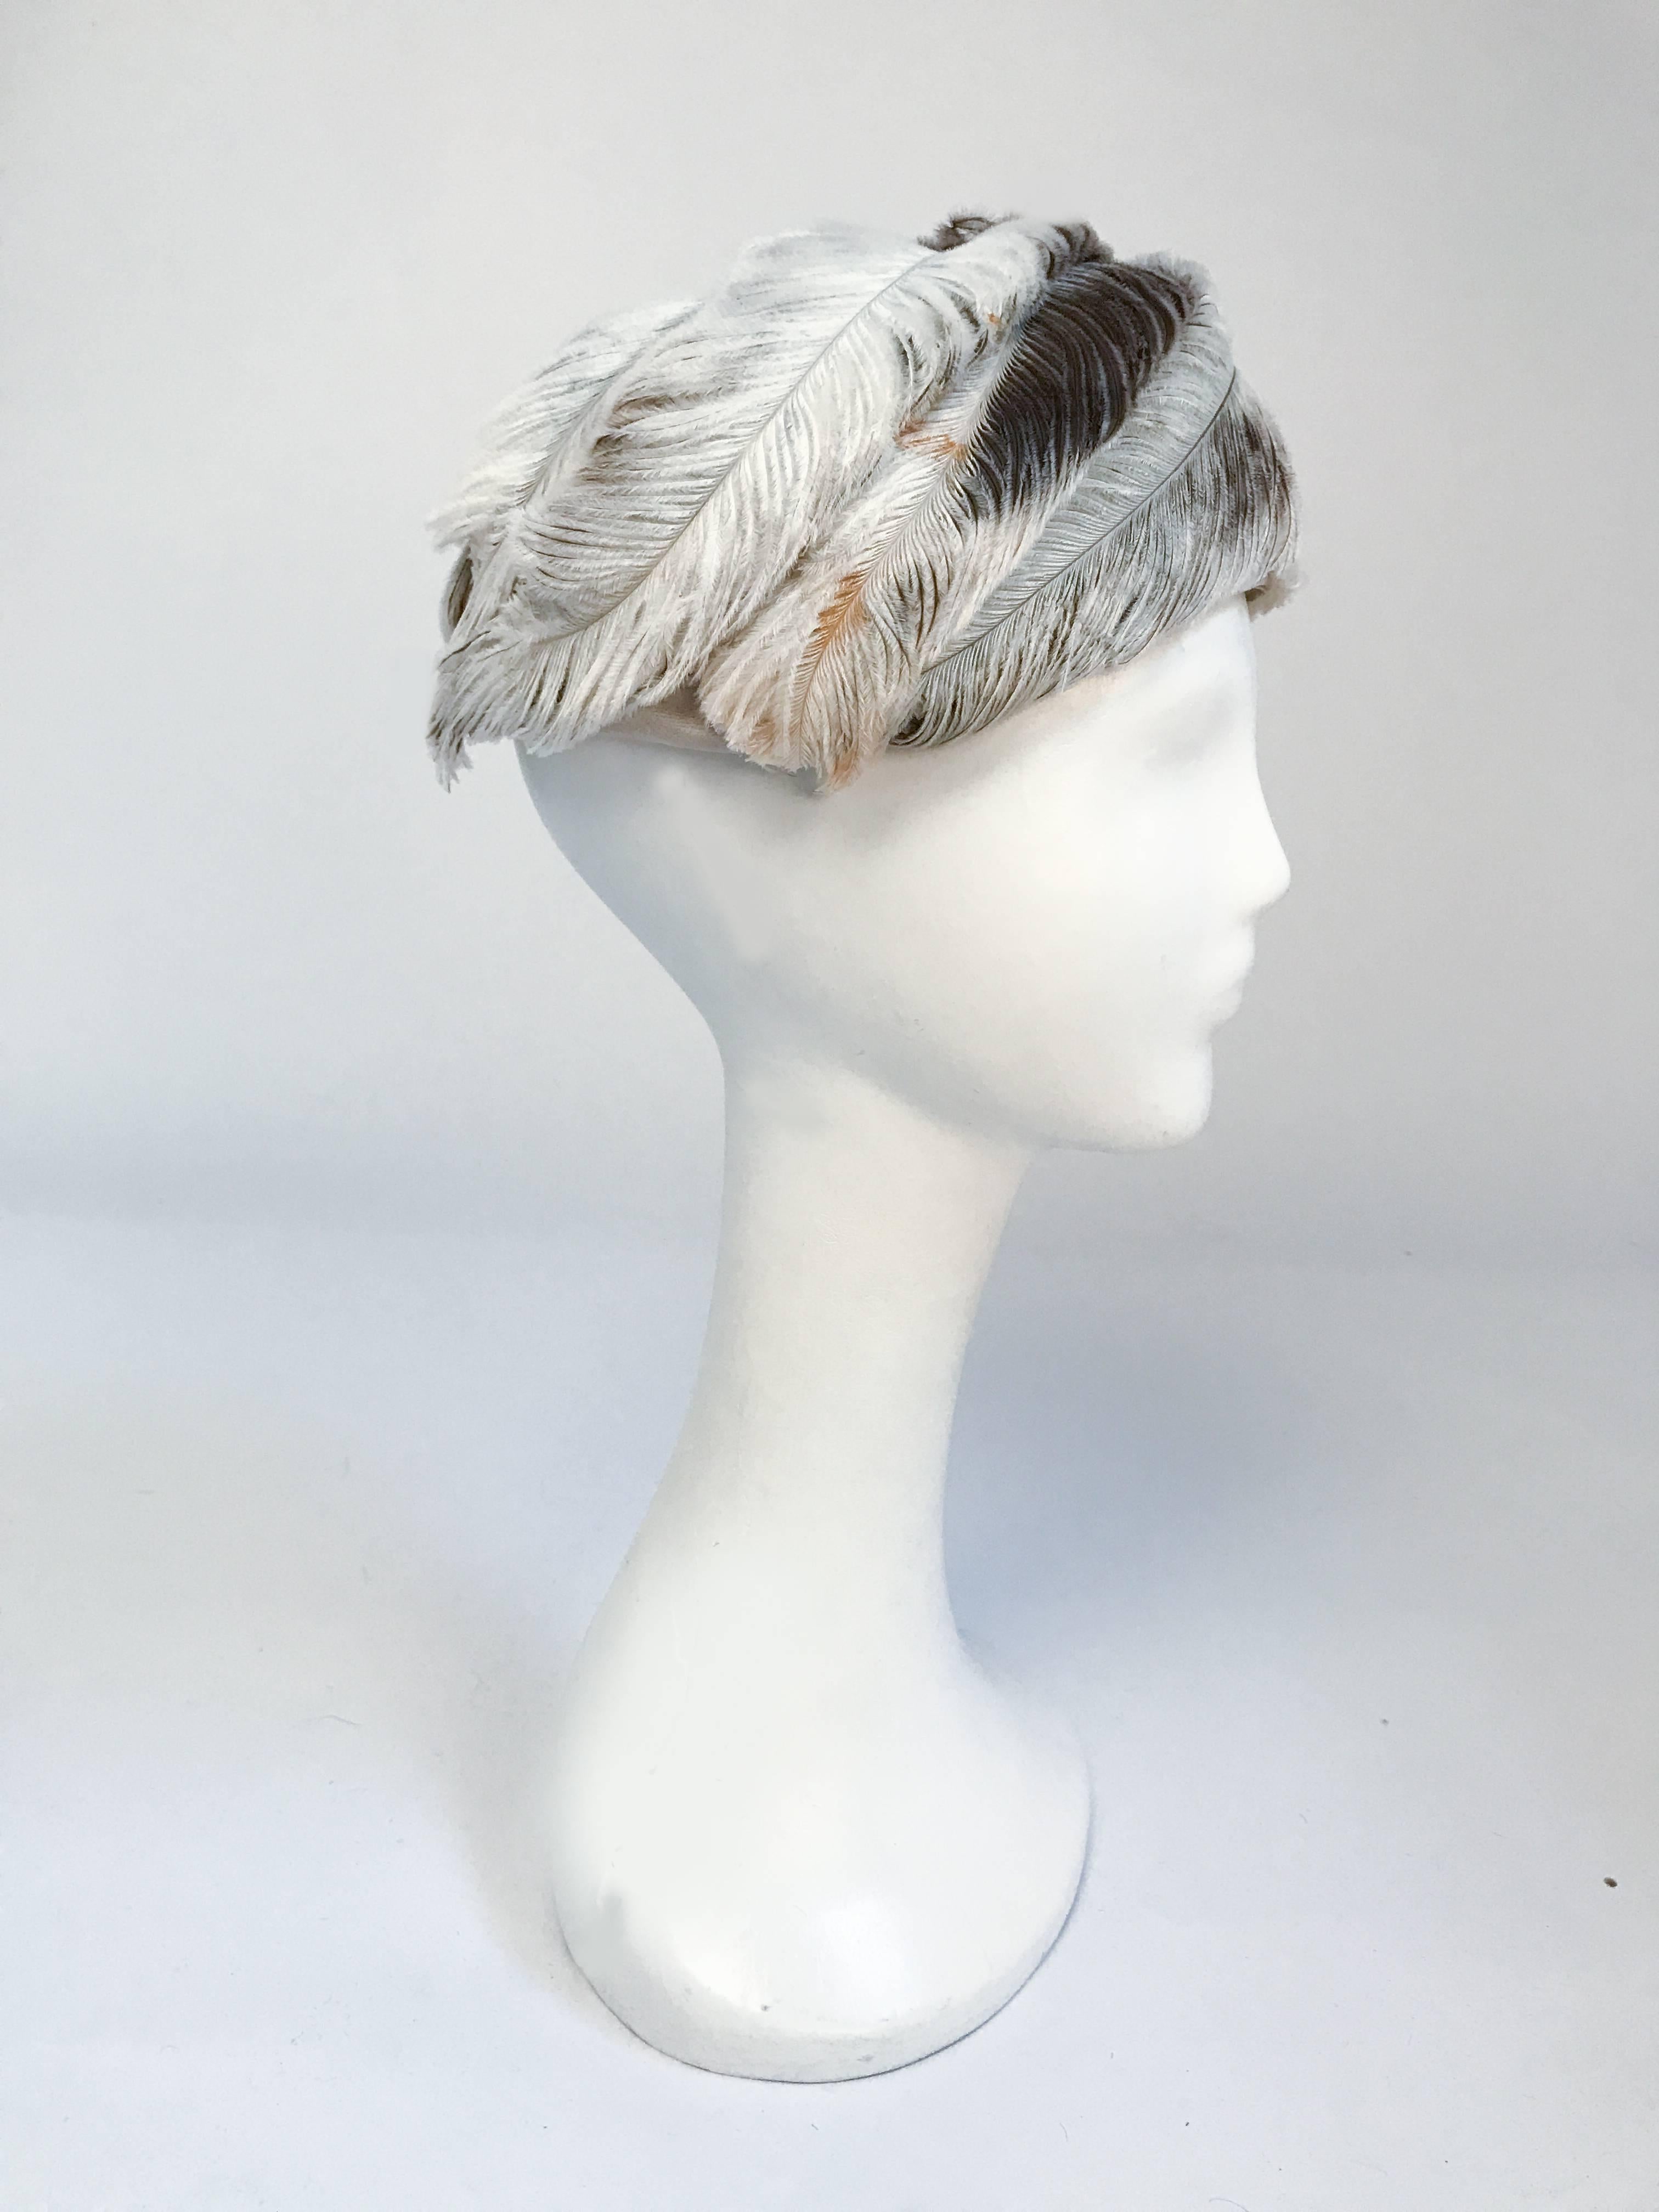 1950's White and Brown Feather Hat. White and brown marabou feather hat with round structure. 